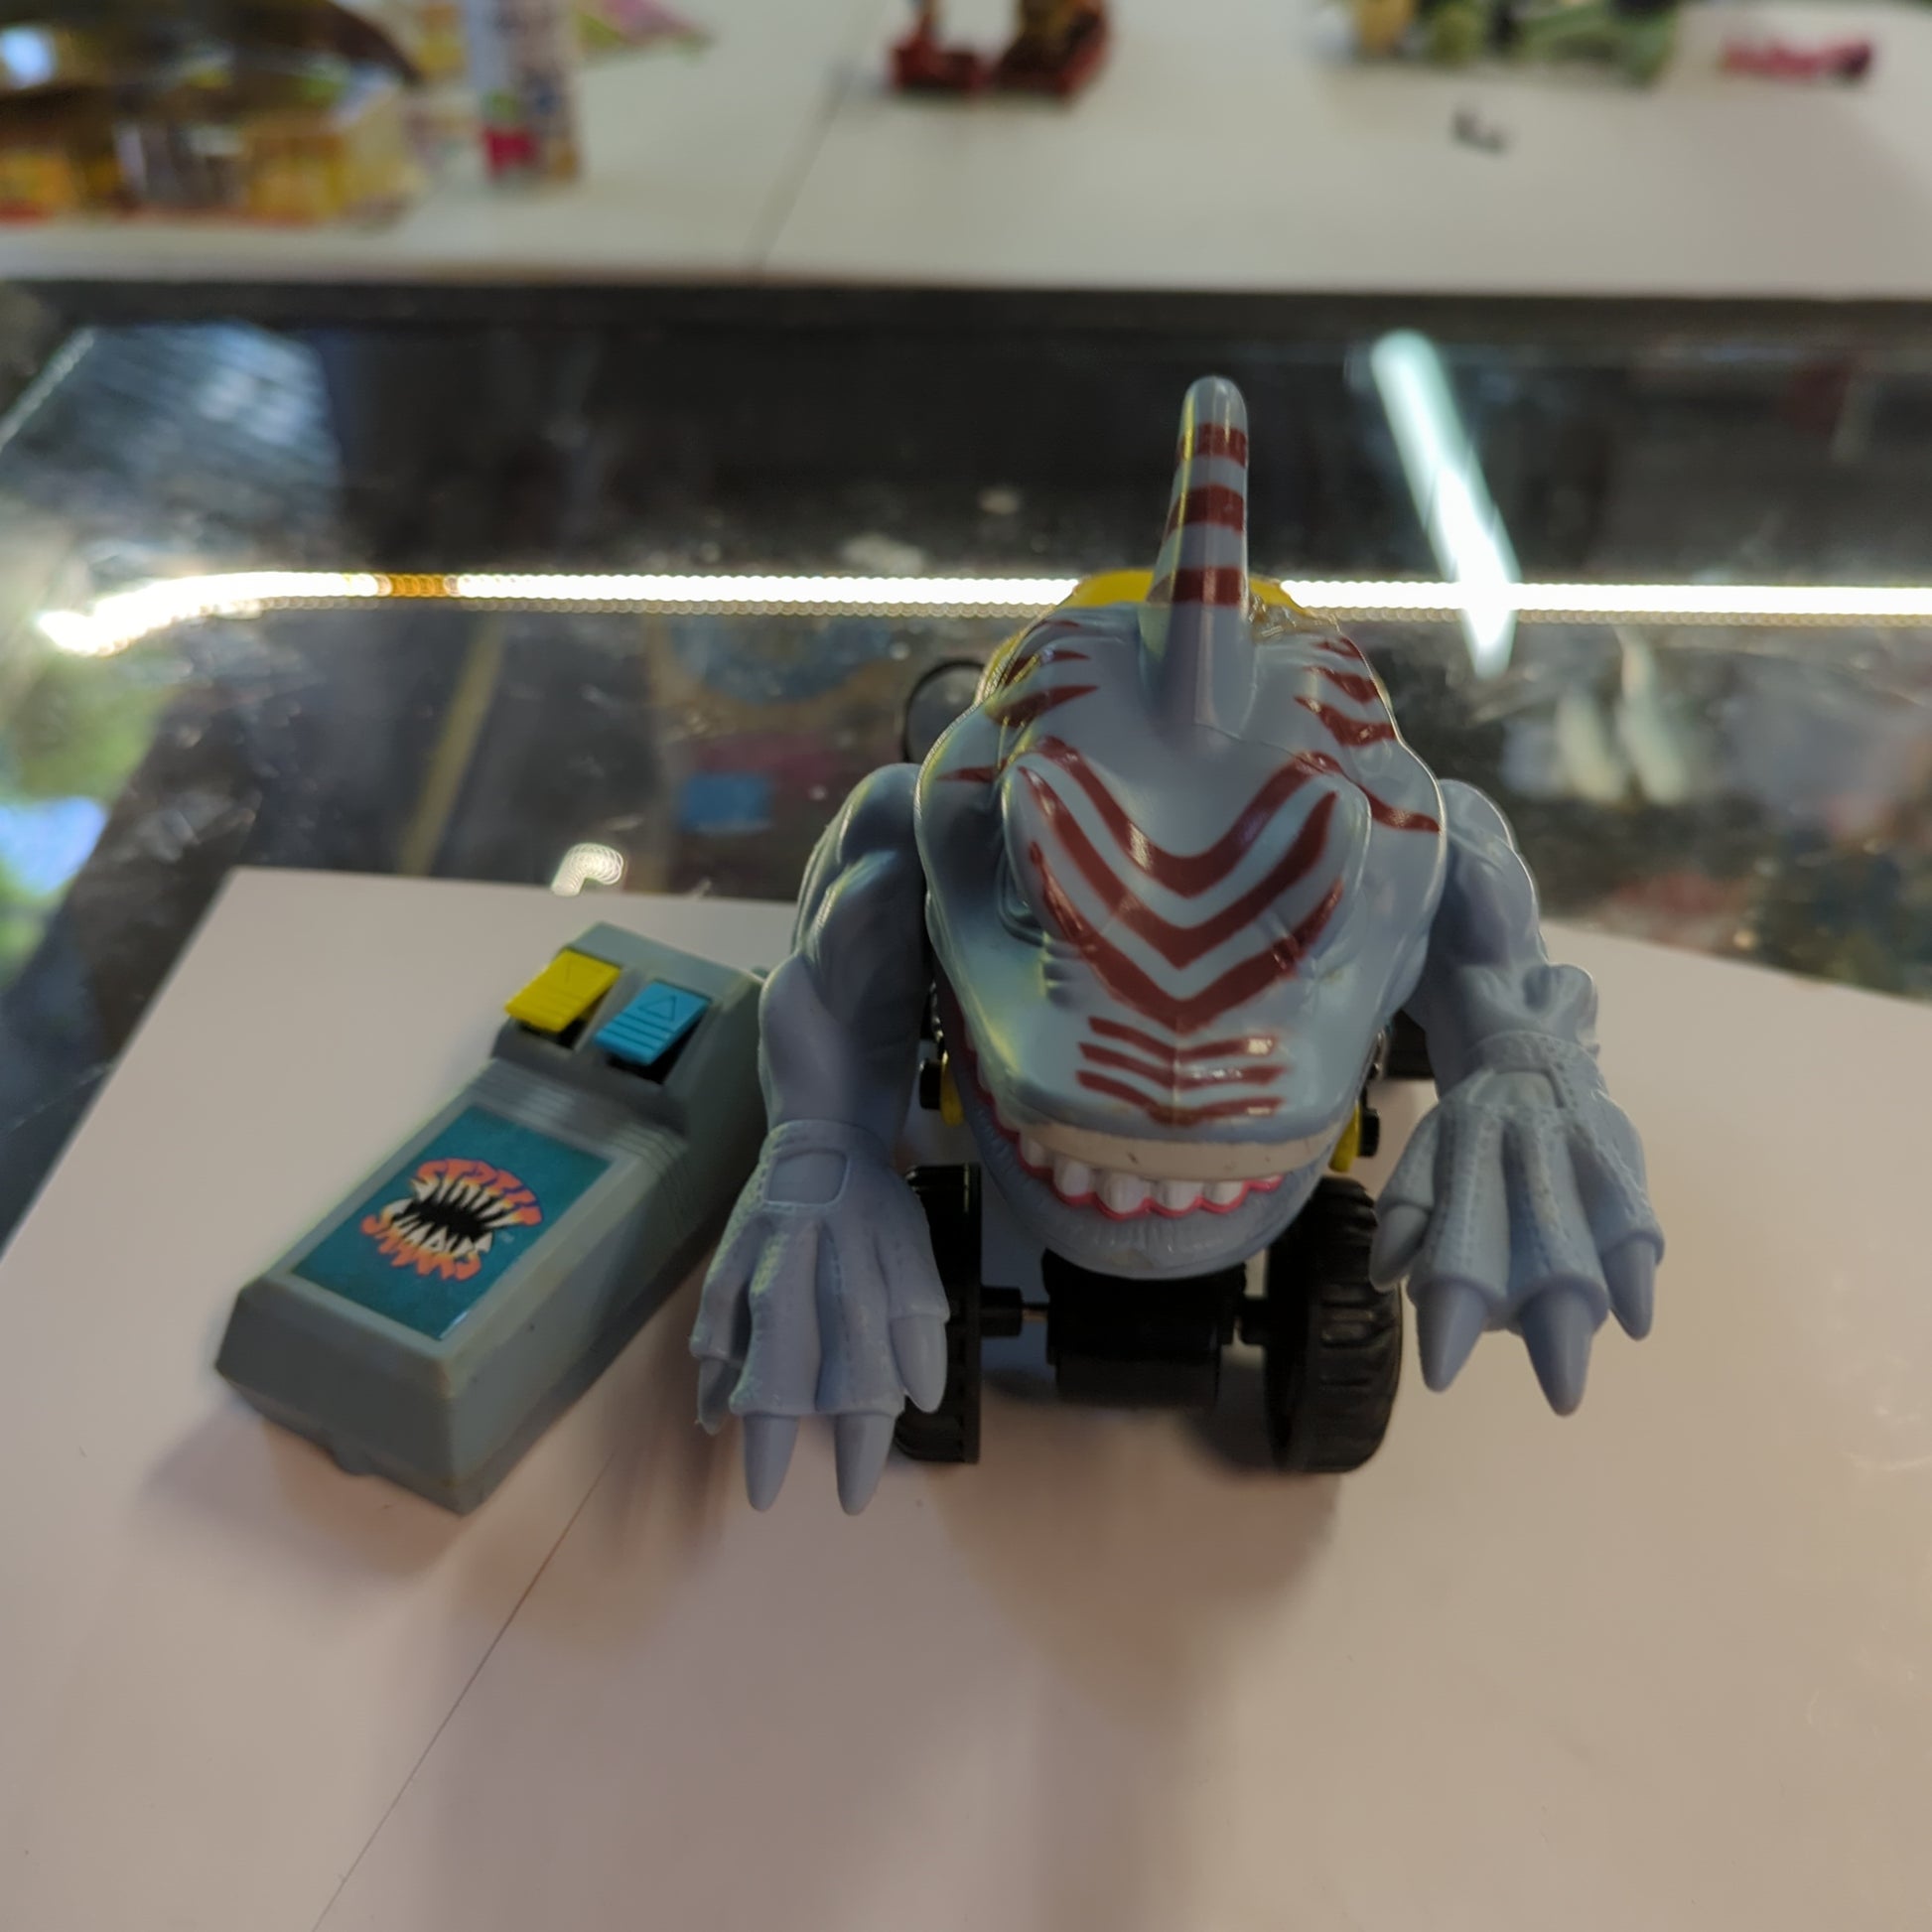 1995 Street Sharks Remote RC Car yes Remote STREEX - Mattel (Not Fully Working) FRENLY BRICKS - Open 7 Days